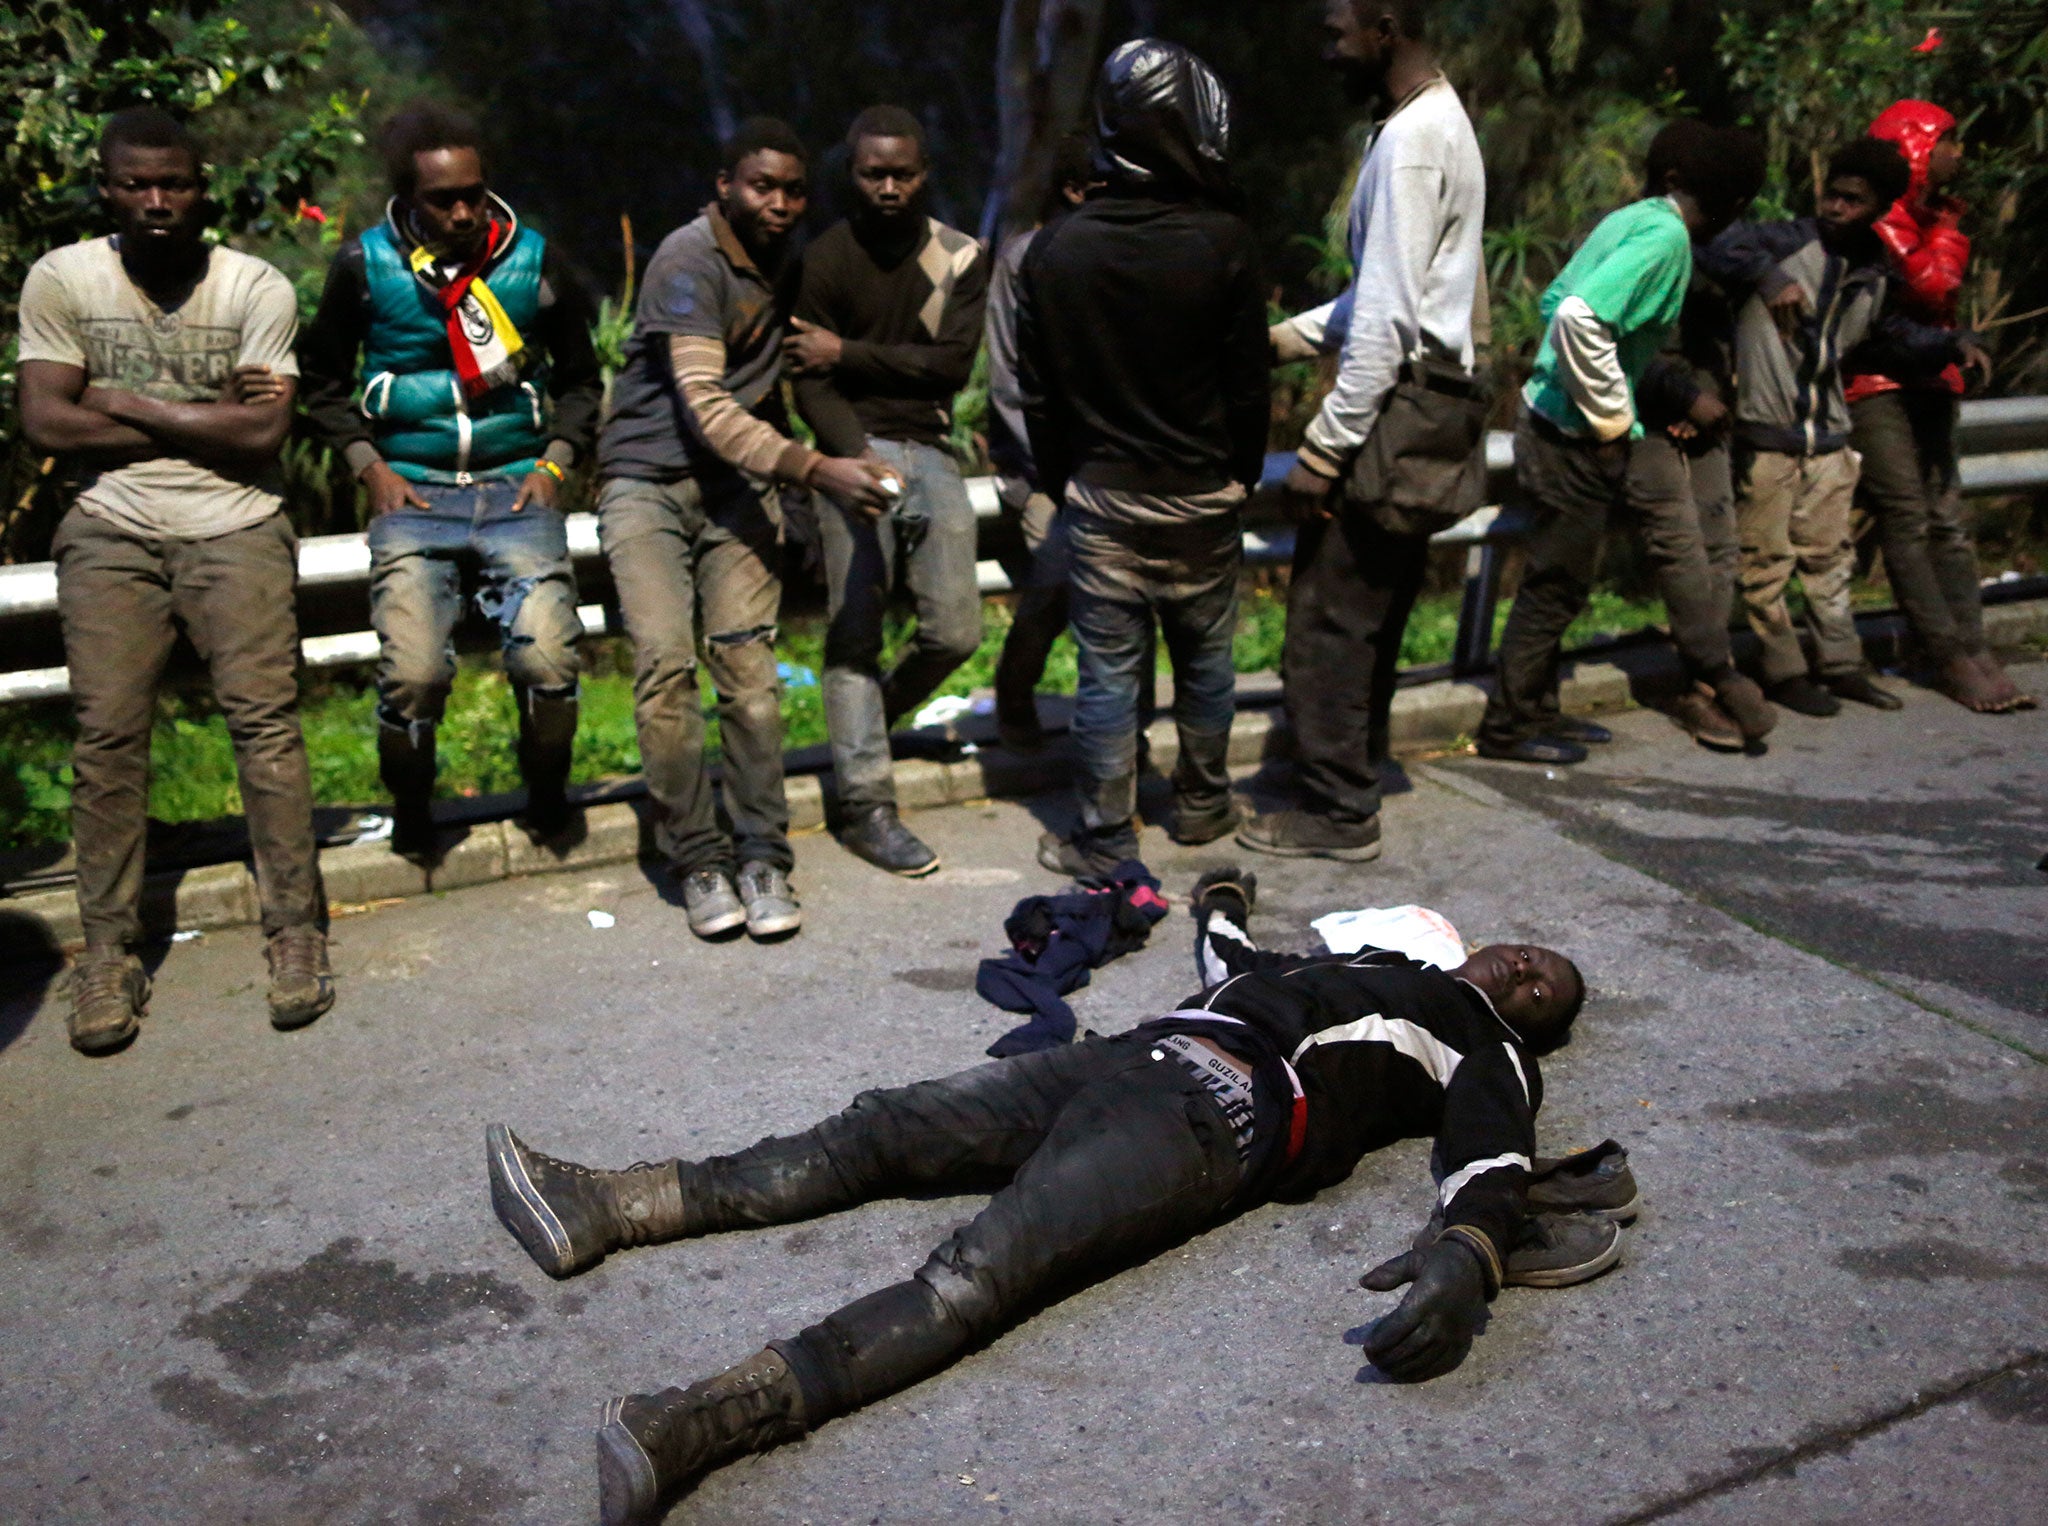 Migrants rest after storming a fence to enter the Spanish enclave of Ceuta, Spain, on 17 February